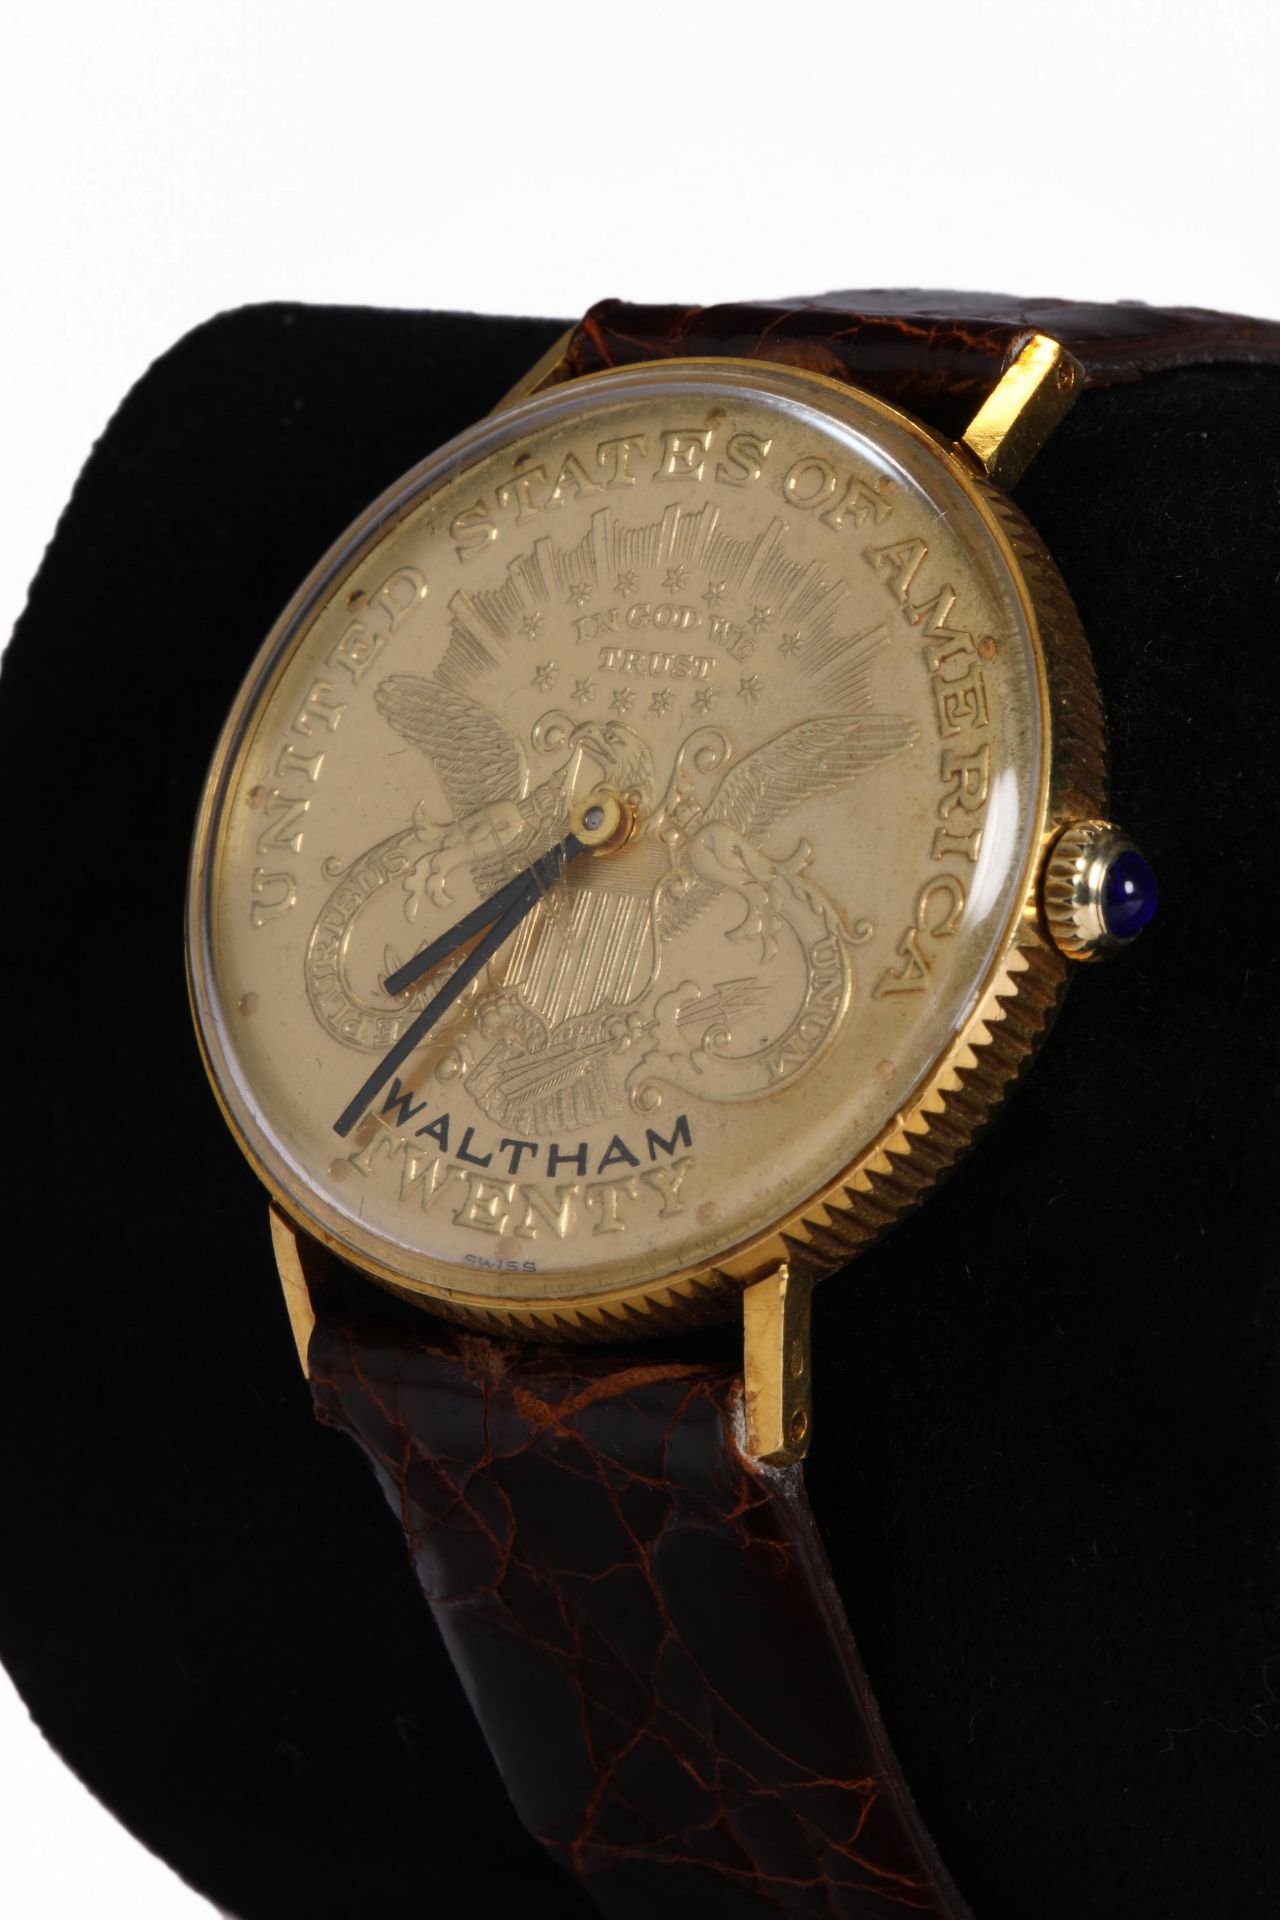 American Waltham Gold Coin Watch - Image 2 of 8